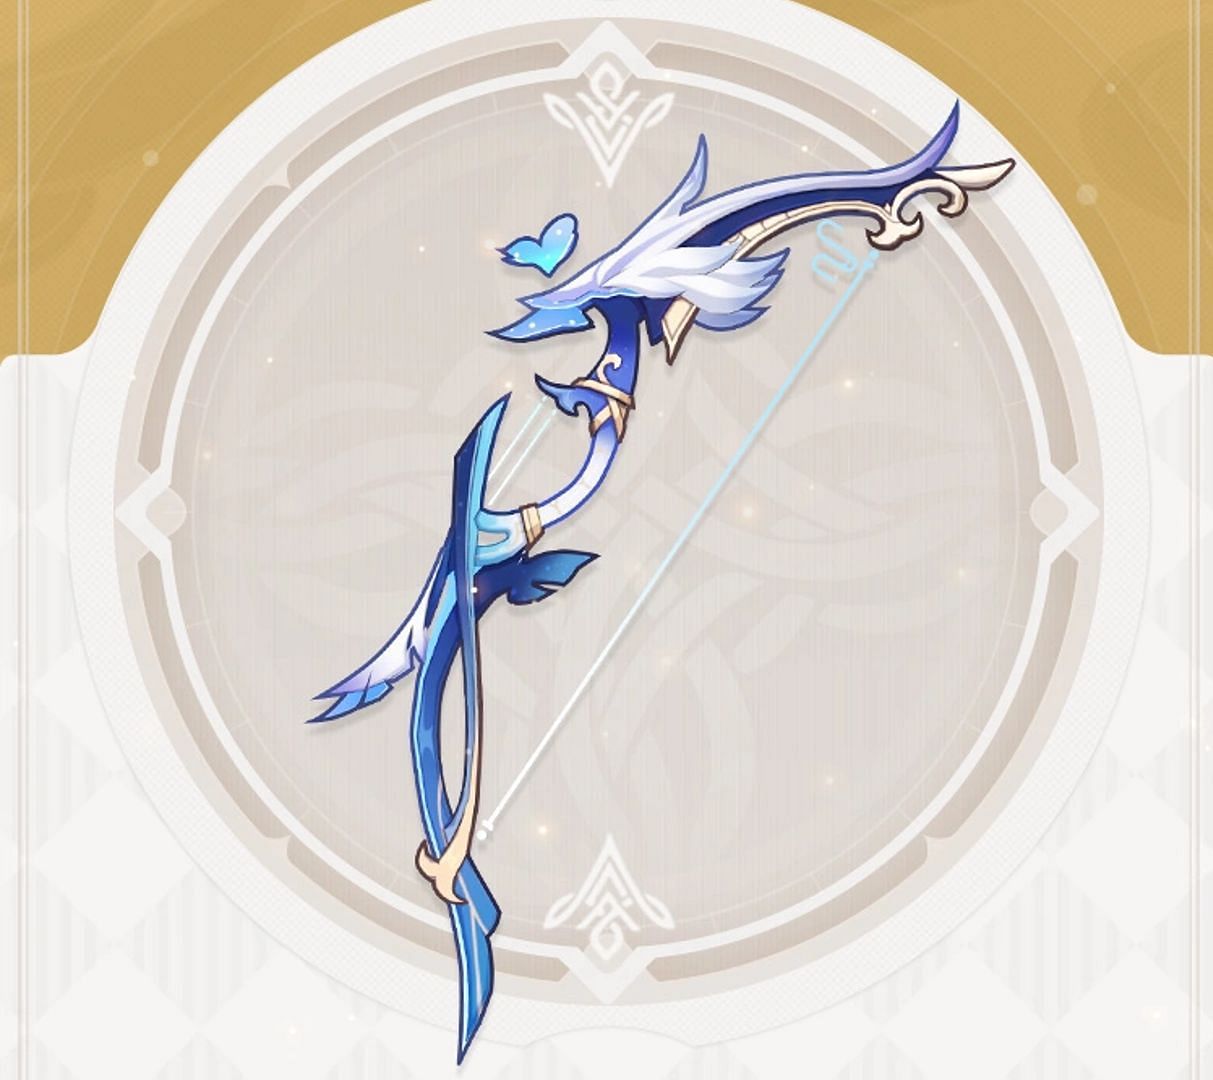 Epitomized Path can let you get featured 5-star weapons like Aqua Simulacra in Version 3.4's second phase (Image via HoYoverse)